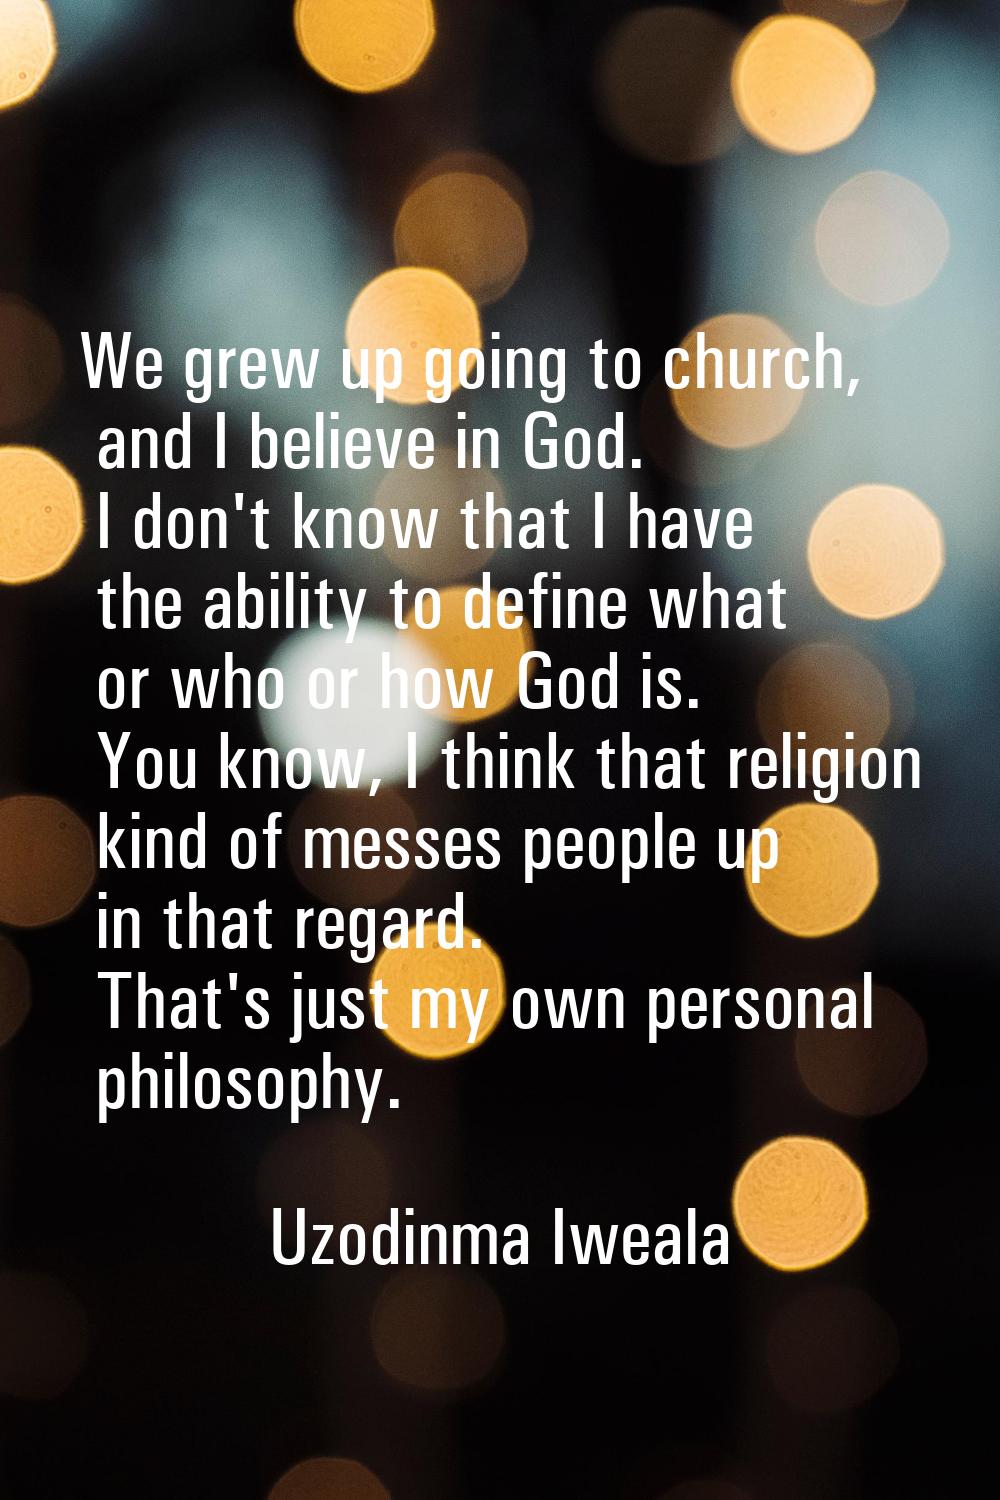 We grew up going to church, and I believe in God. I don't know that I have the ability to define wh